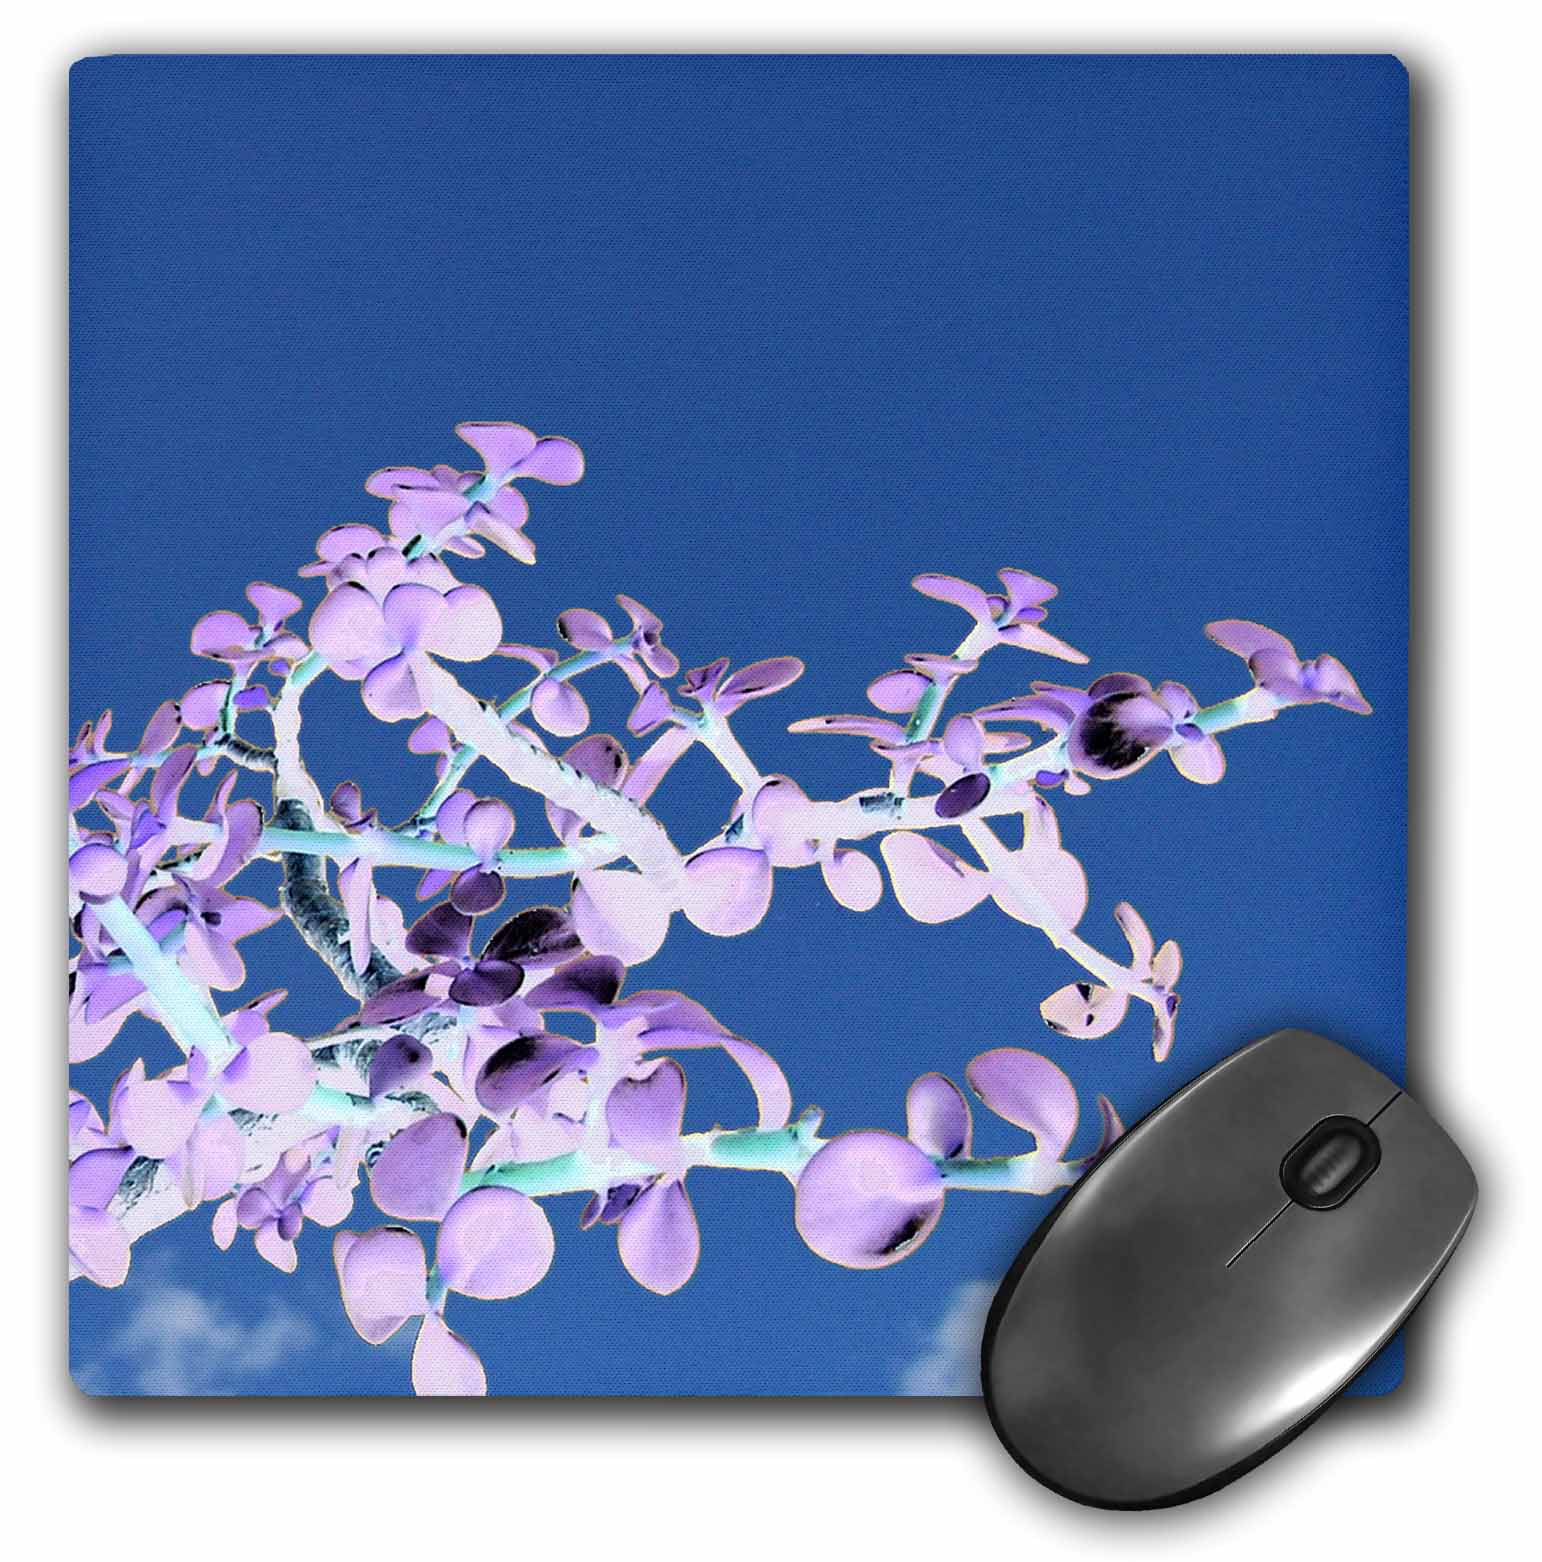 mp_182075_1 3dRose Mouse Pad Bonsai Inverted Purple White Against Sky Portulacaria 8 by 8-Inches 